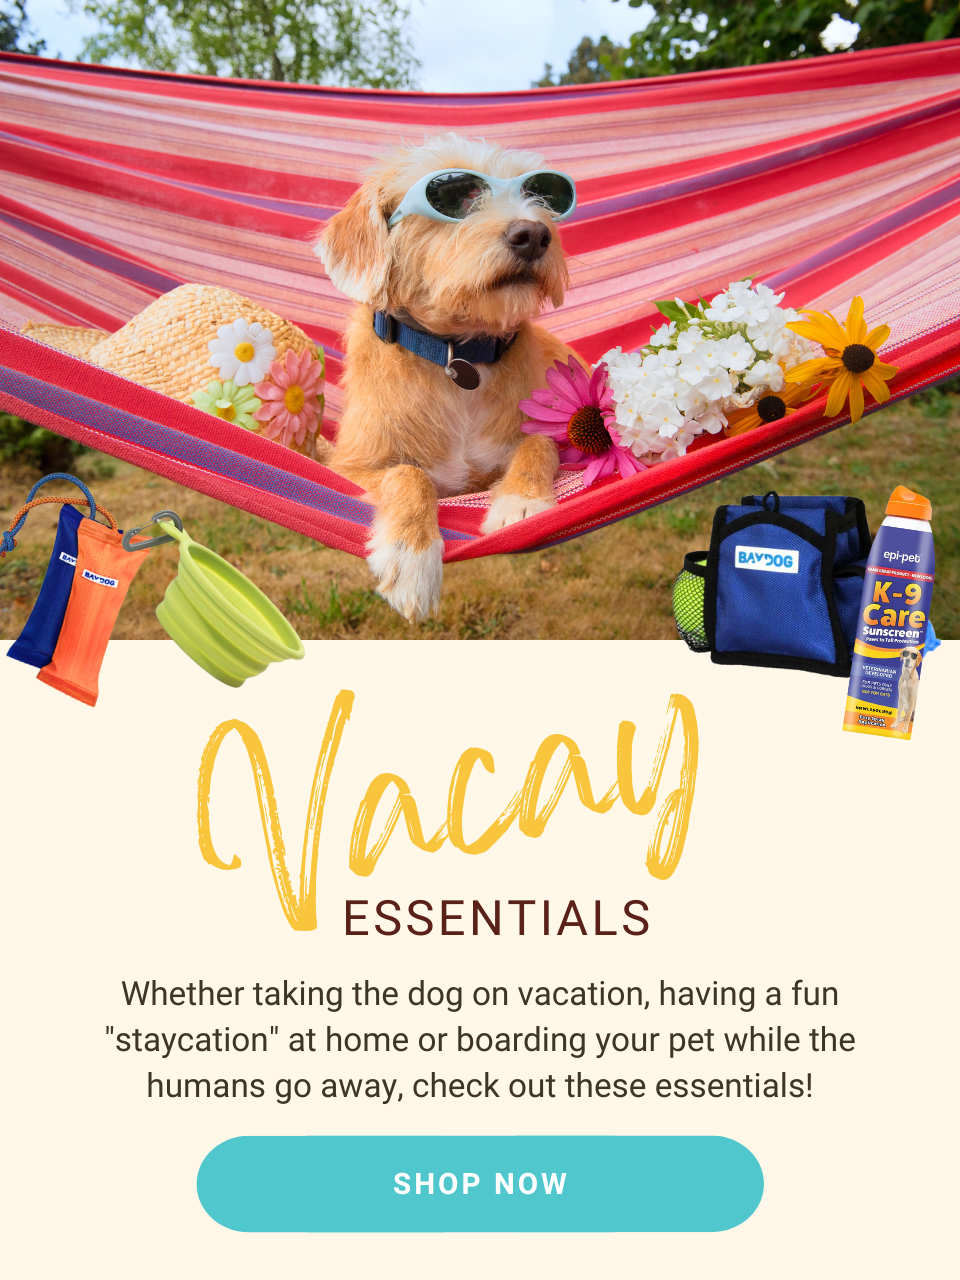 Vacay Essentials! Check out our collection of essentials for vacation! Shop now!